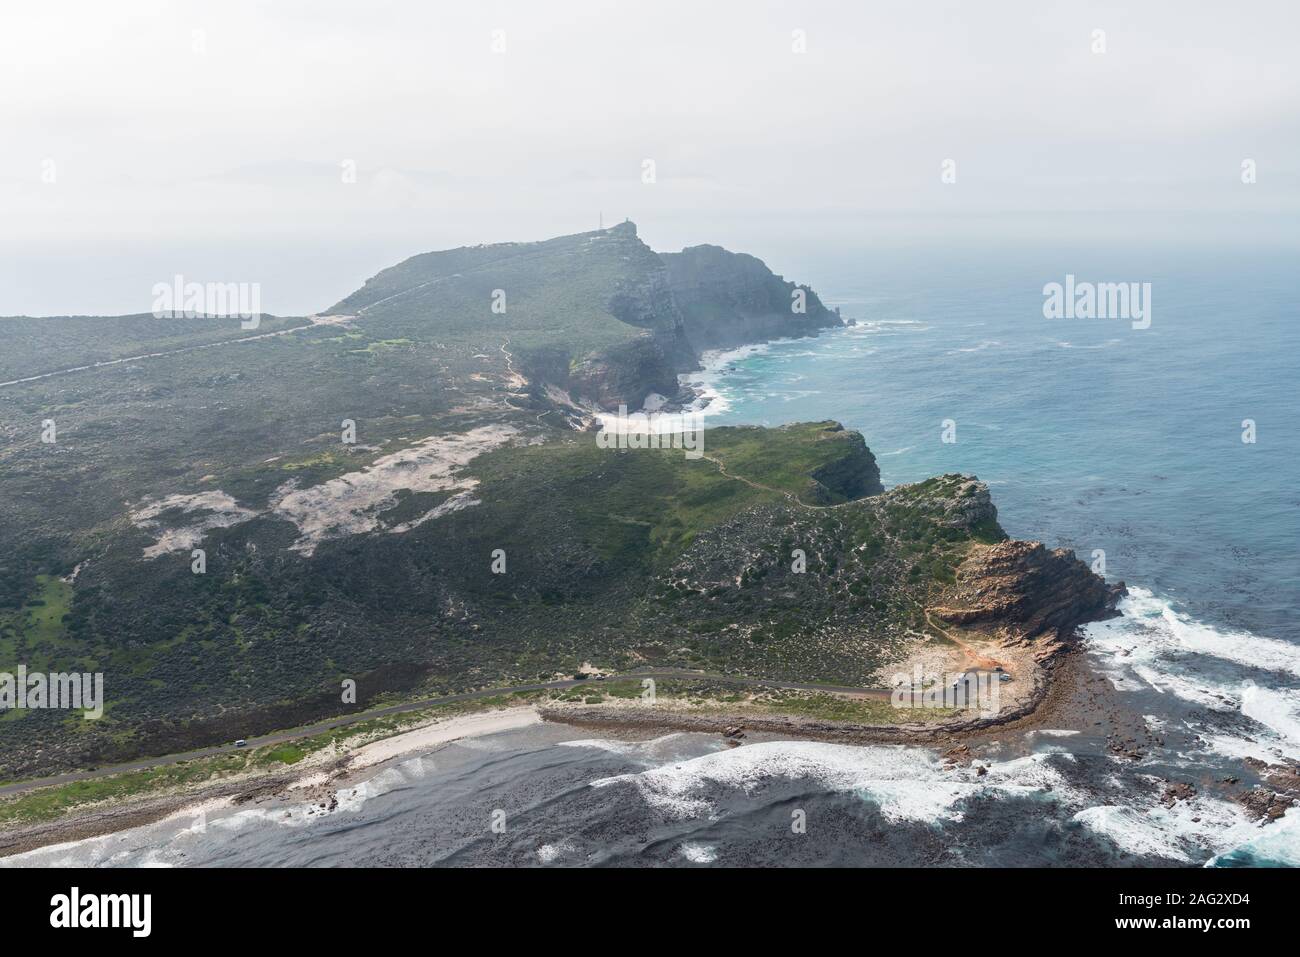 Cape of good hope (South Africa) aerial view shot from a helicopter Stock Photo